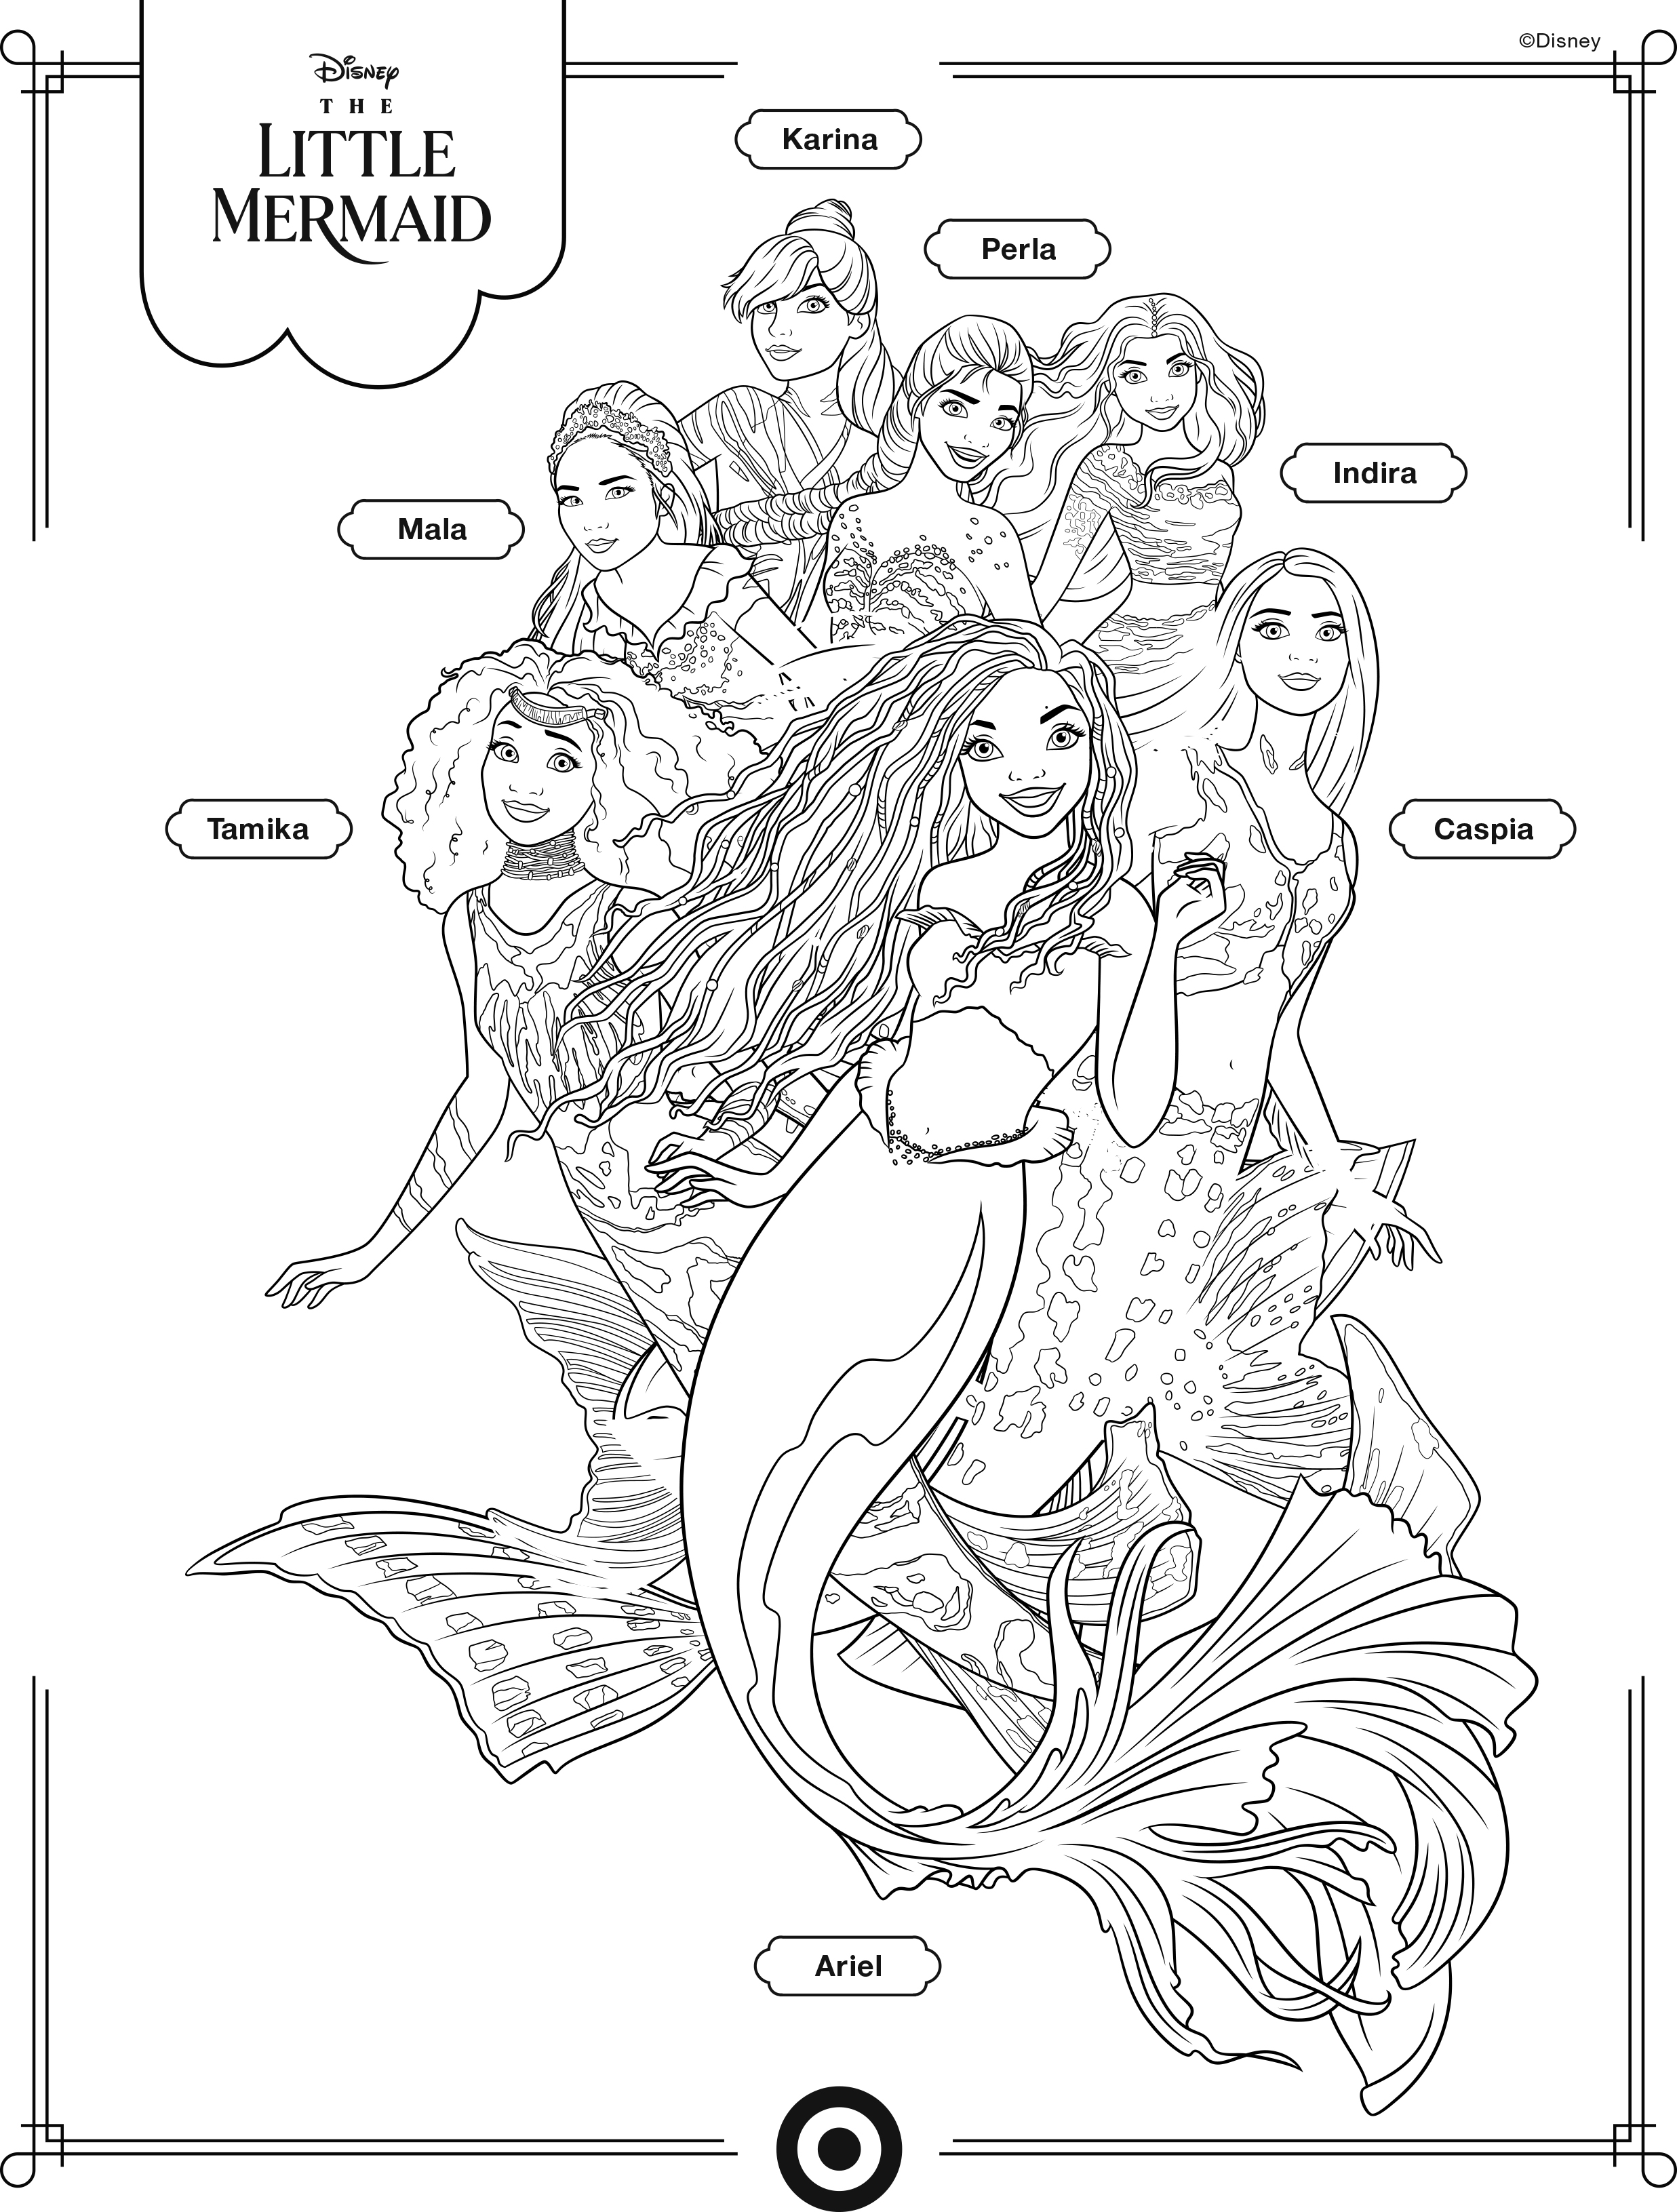 44 Harry Potter Coloring Pages (Free PDF Printables)  Harry potter  coloring pages, Harry potter coloring book, Harry potter colors